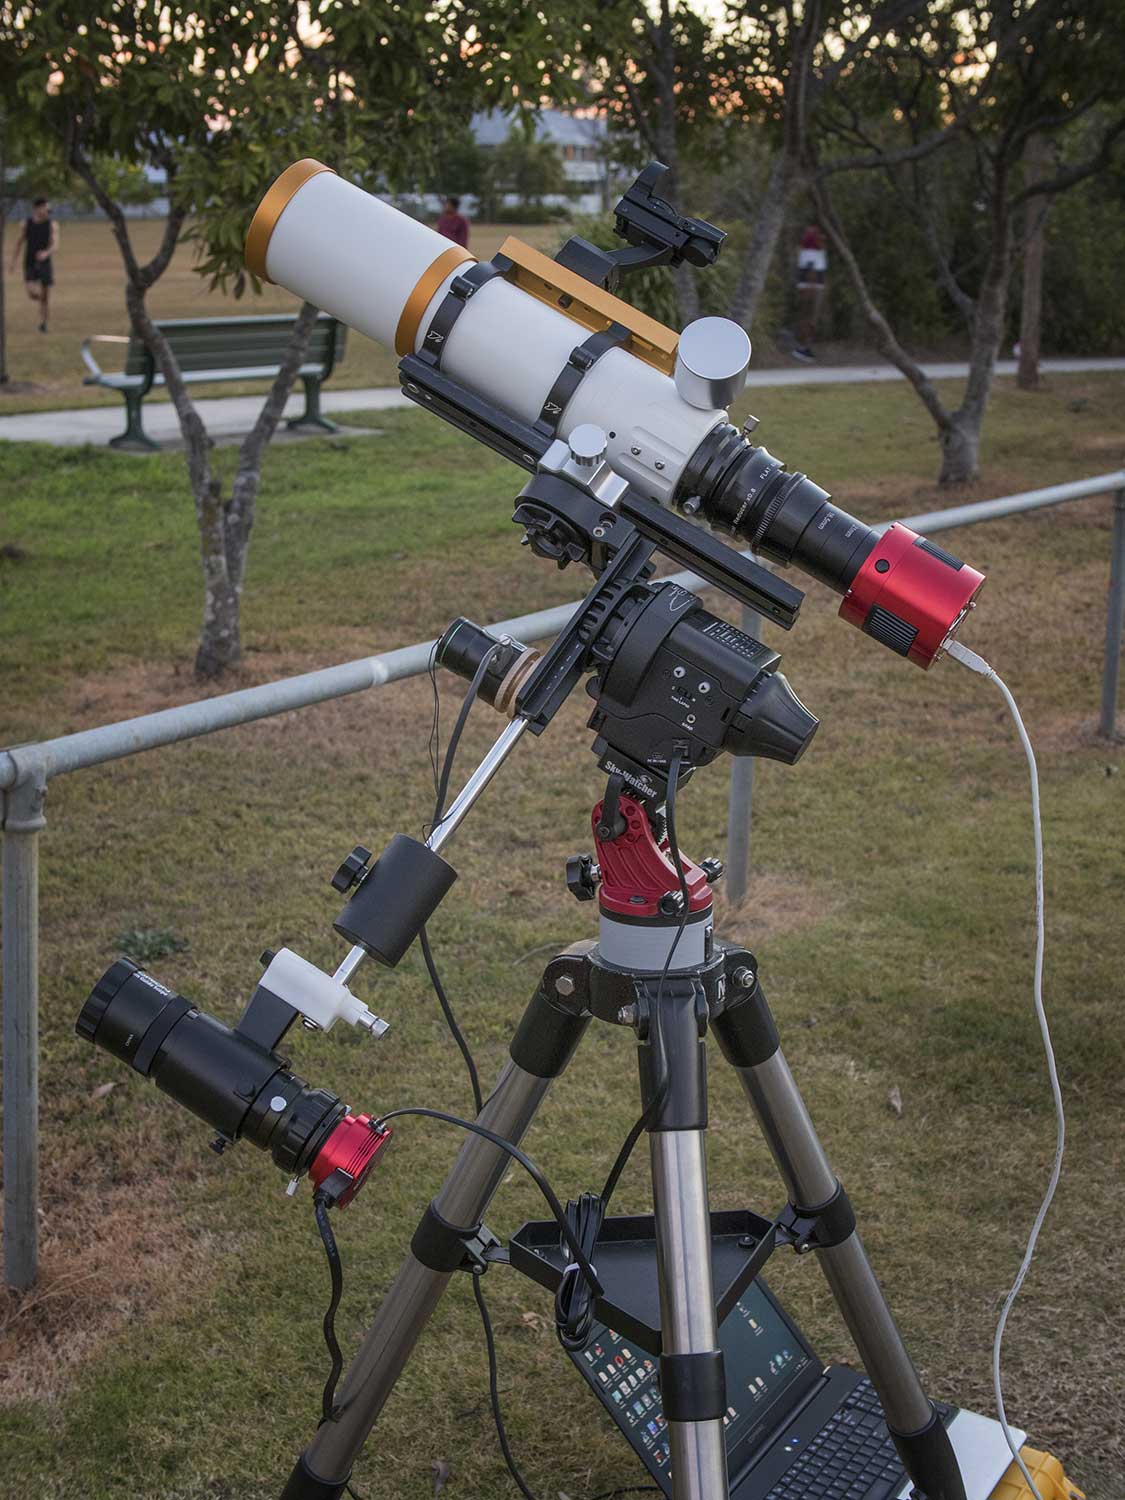 PHD2 Guiding with Star Adventurer Mount - William Optics GT71 with PoleMaster visible.